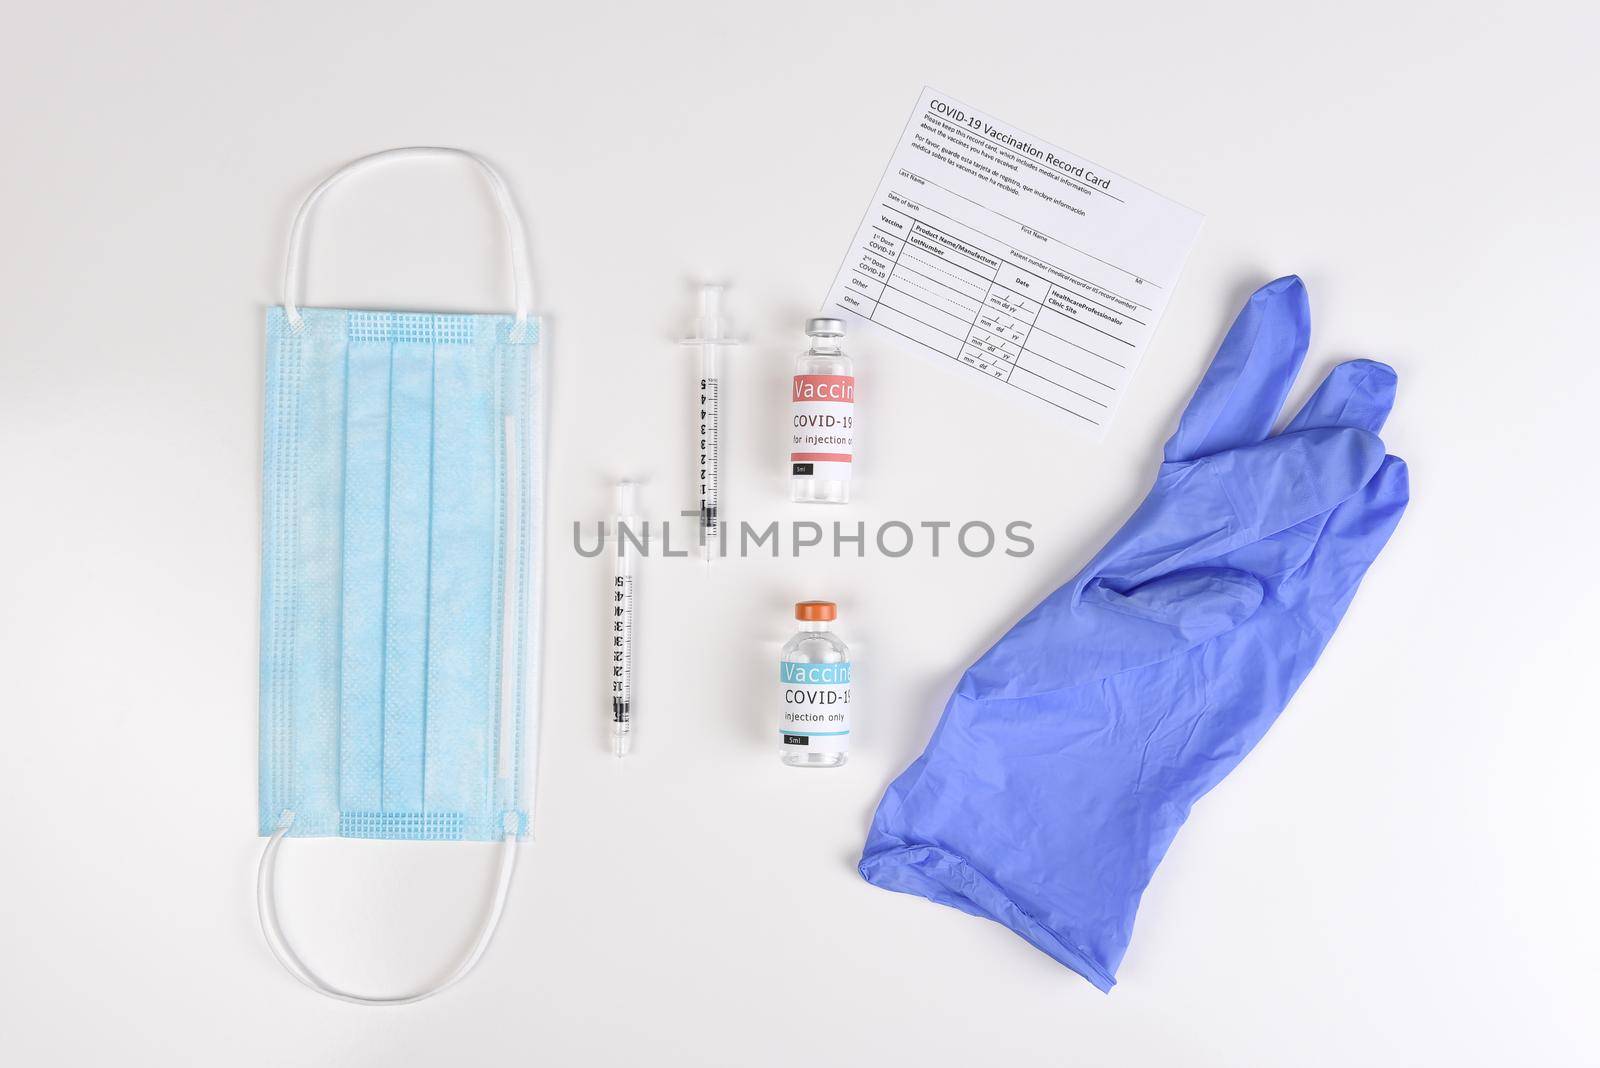 Equipment to administer a Covid19 Vaccination with record card. Flat lay with surgical mask, syringes, vaccine vials, and glove.